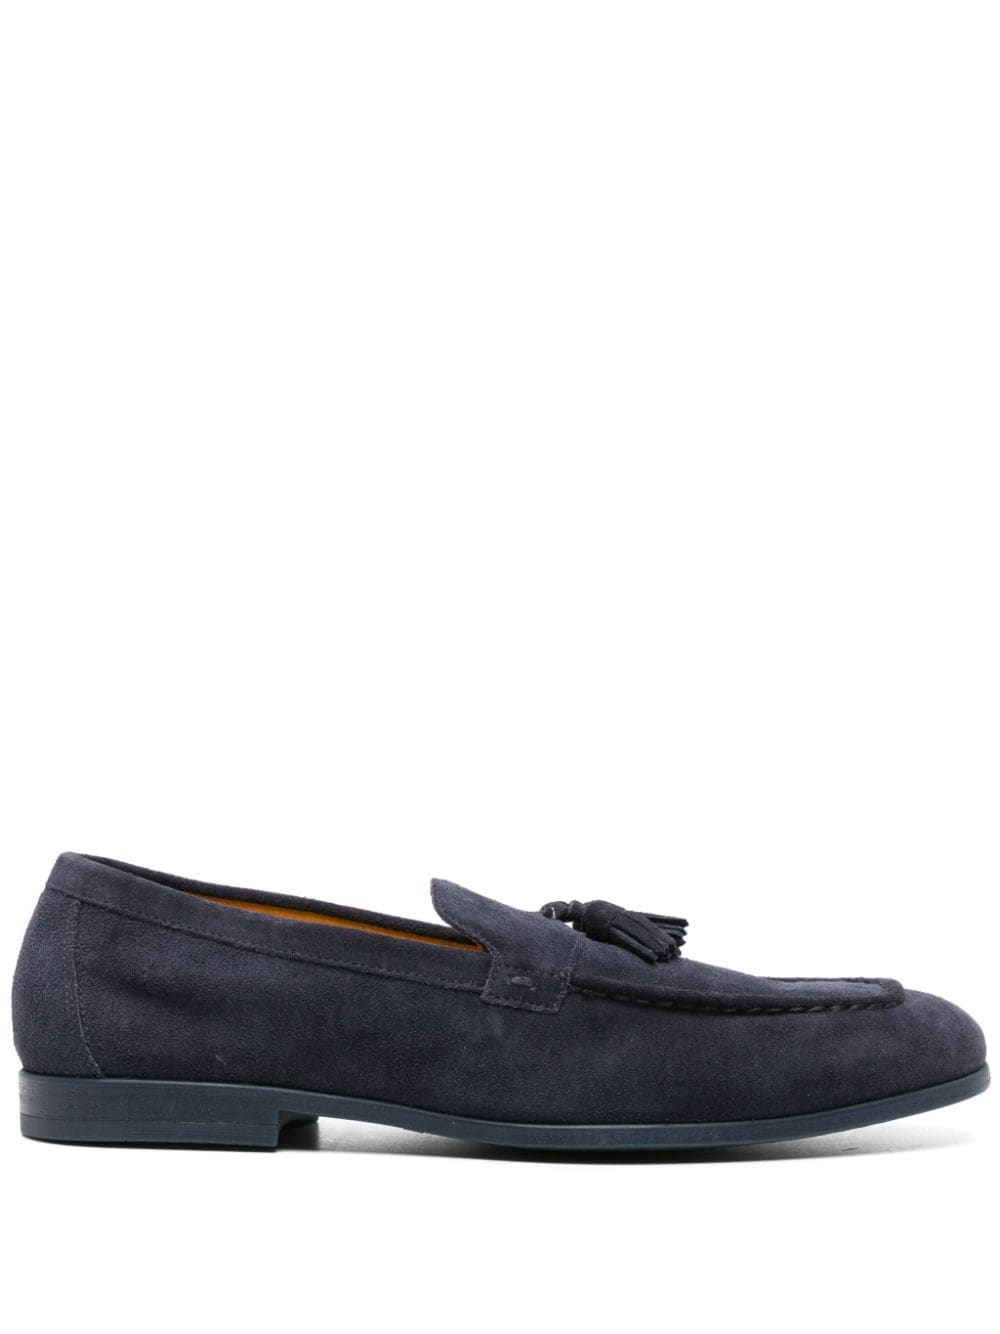 Doucal's tassel-detail suede loafers - Blue von Doucal's